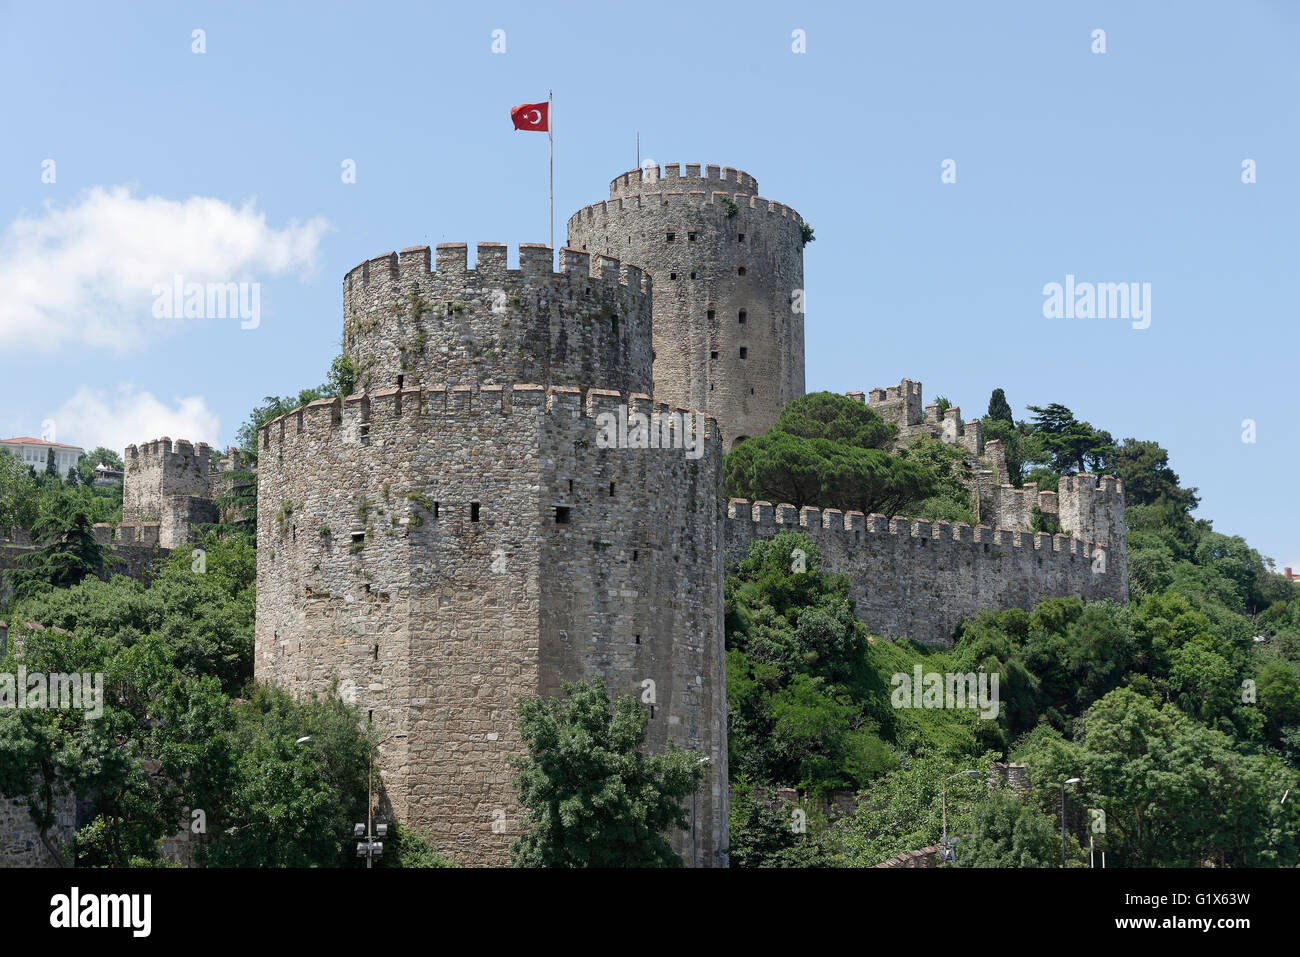 Rumeli, Rumelian fortress on the banks of the Bosphorus, built by the Ottoman Sultan Mehmed II, Istanbul, Turkey Stock Photo